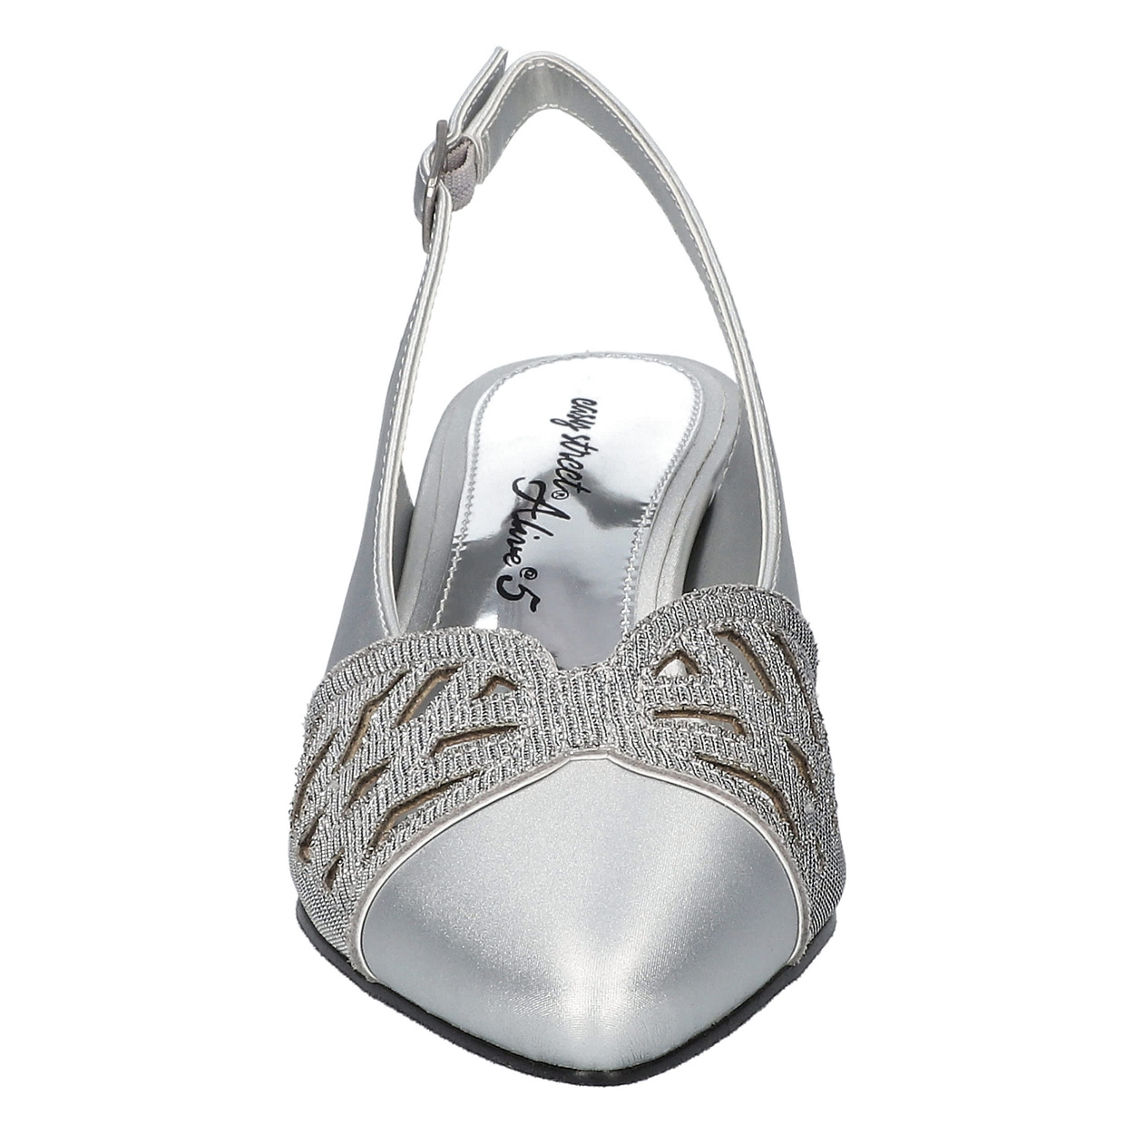 Bizzy by Easy Street Slingback Pumps - Image 2 of 5